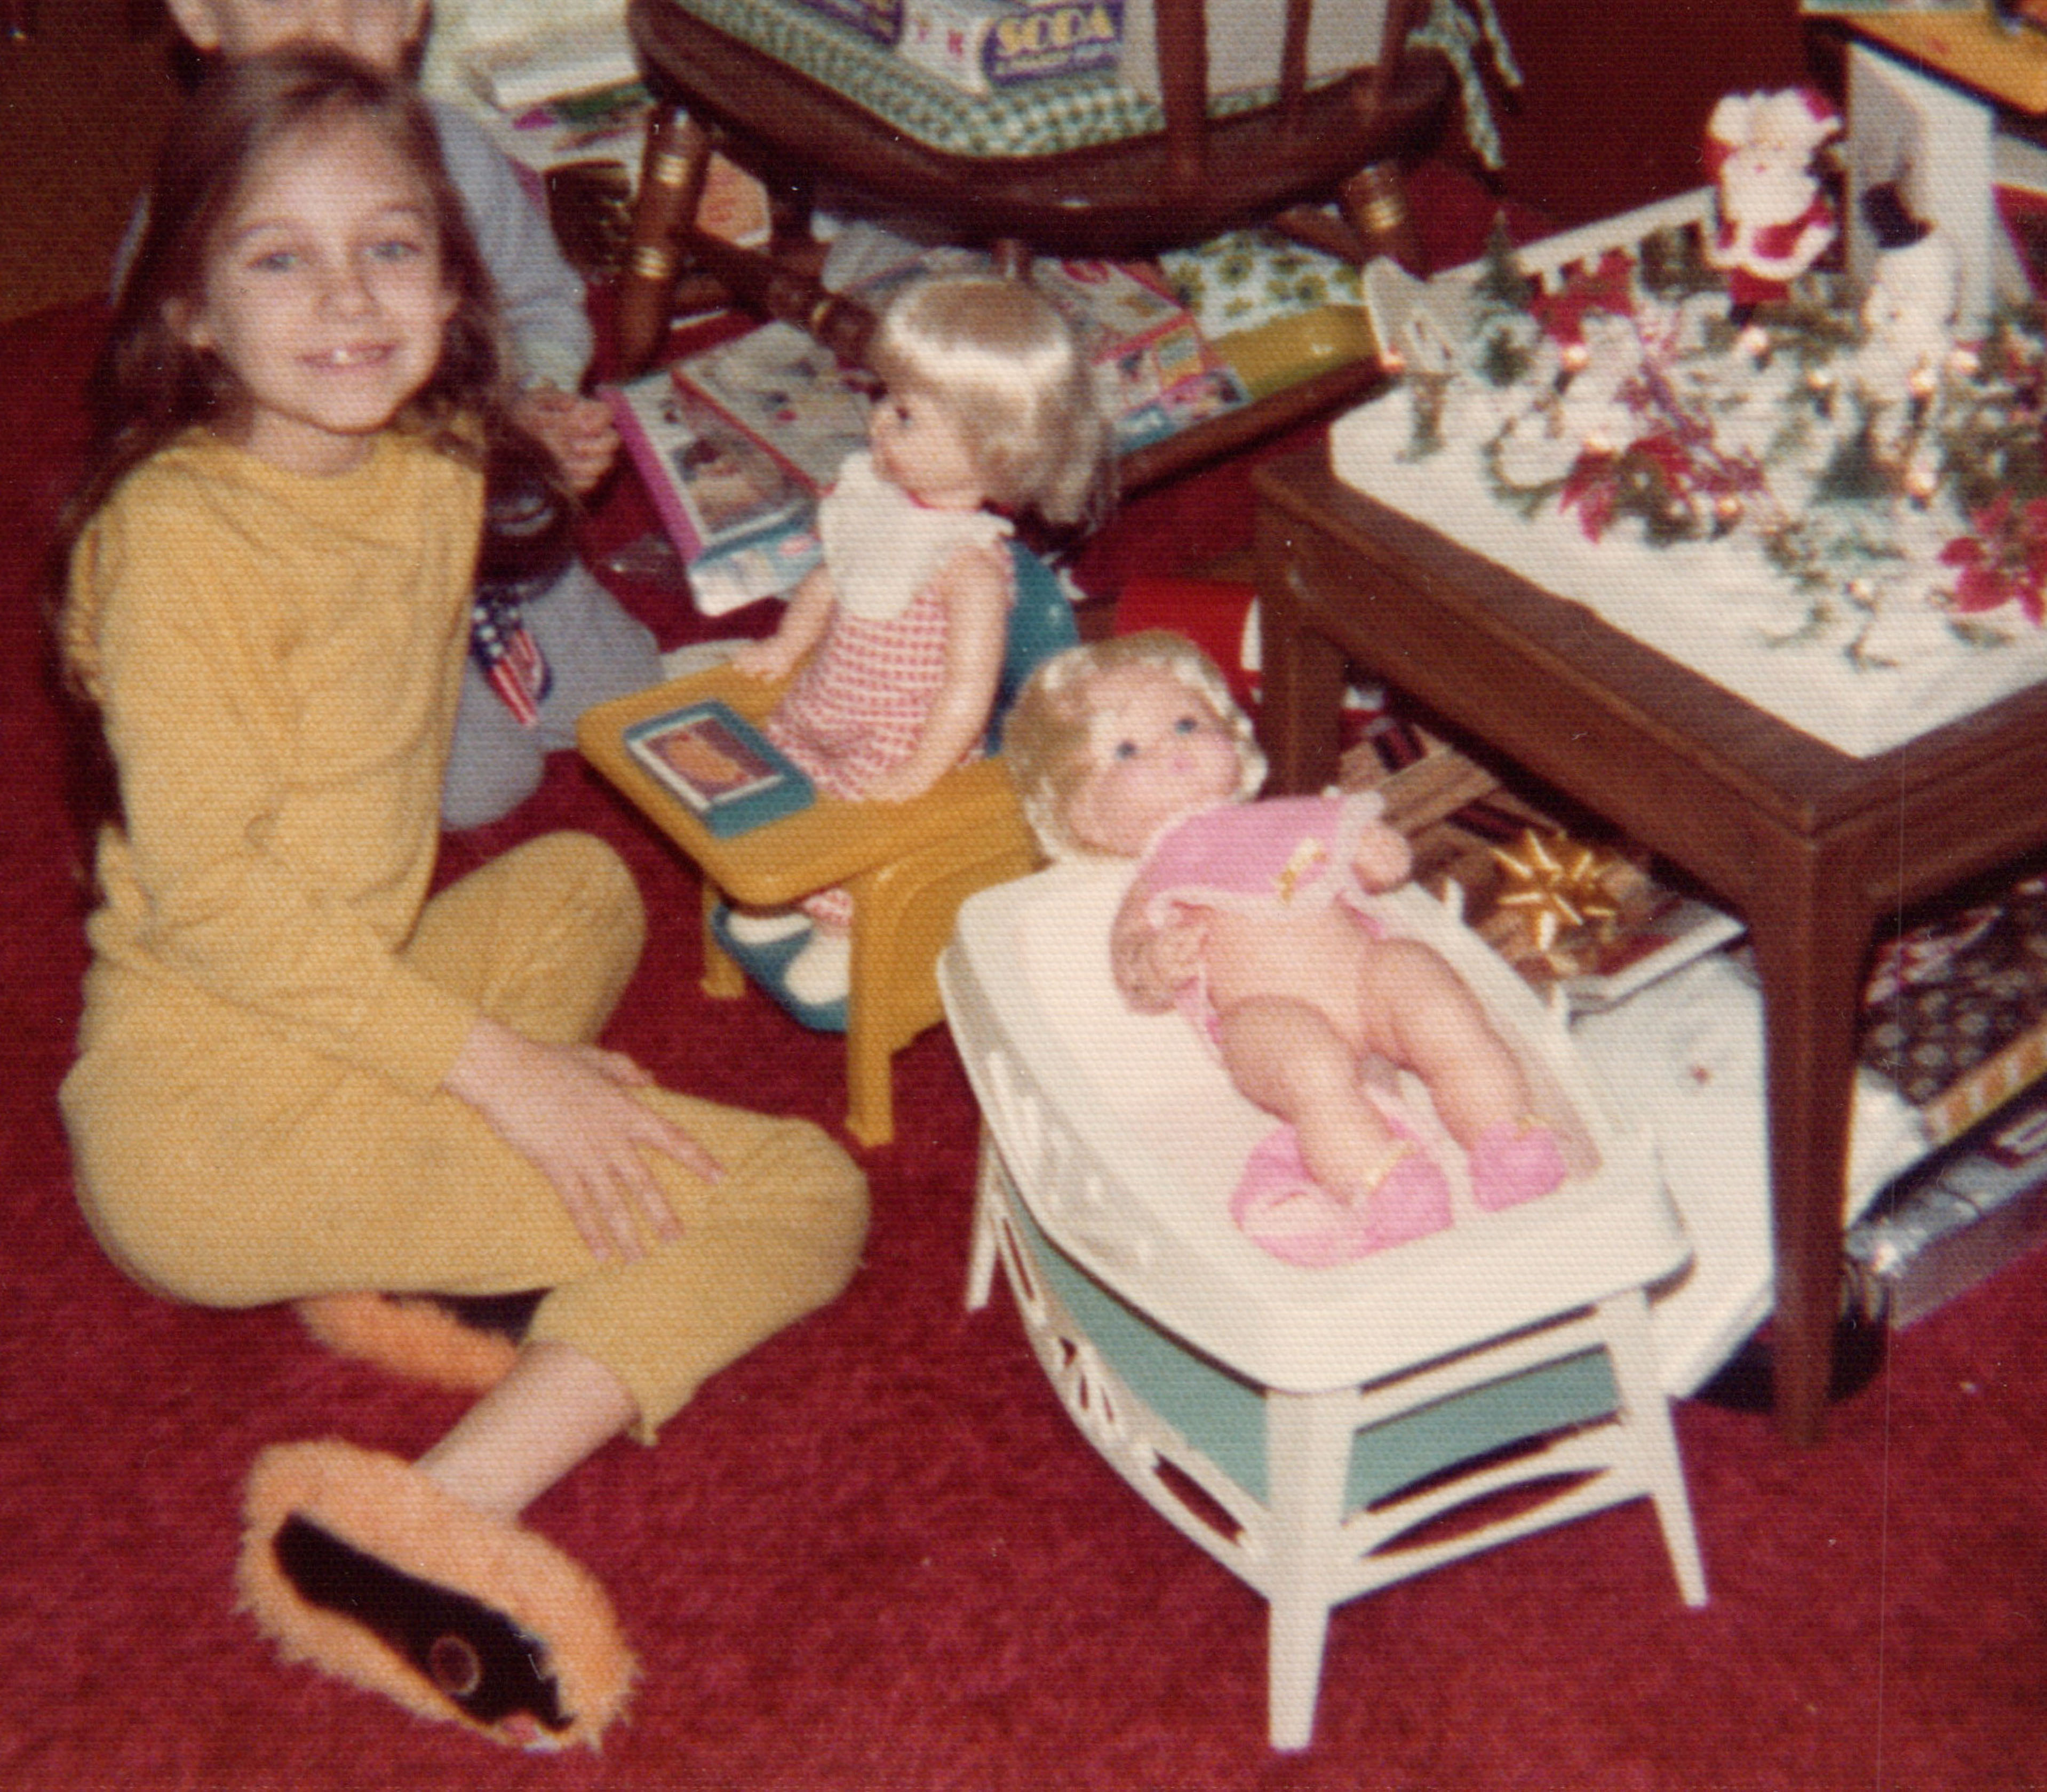 A photo of a young girl in the living room, which was a place to share family stories.